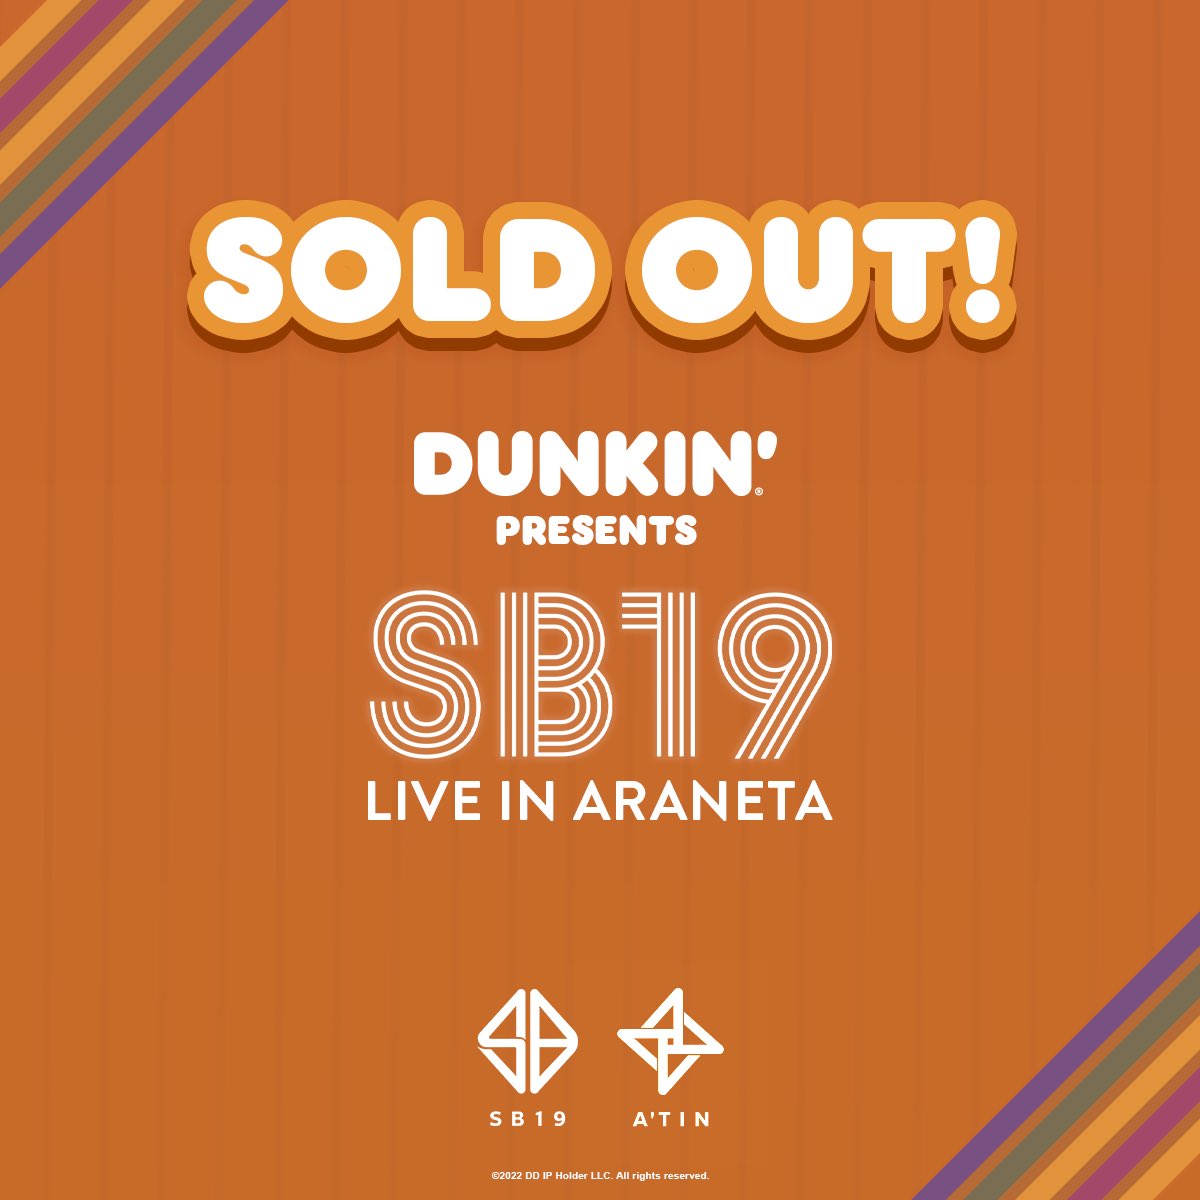 #DunkinPHSB19Concert #DunkinPH

Thank you for the support, A’Tin. See you on April 23,2022. 💙🥰